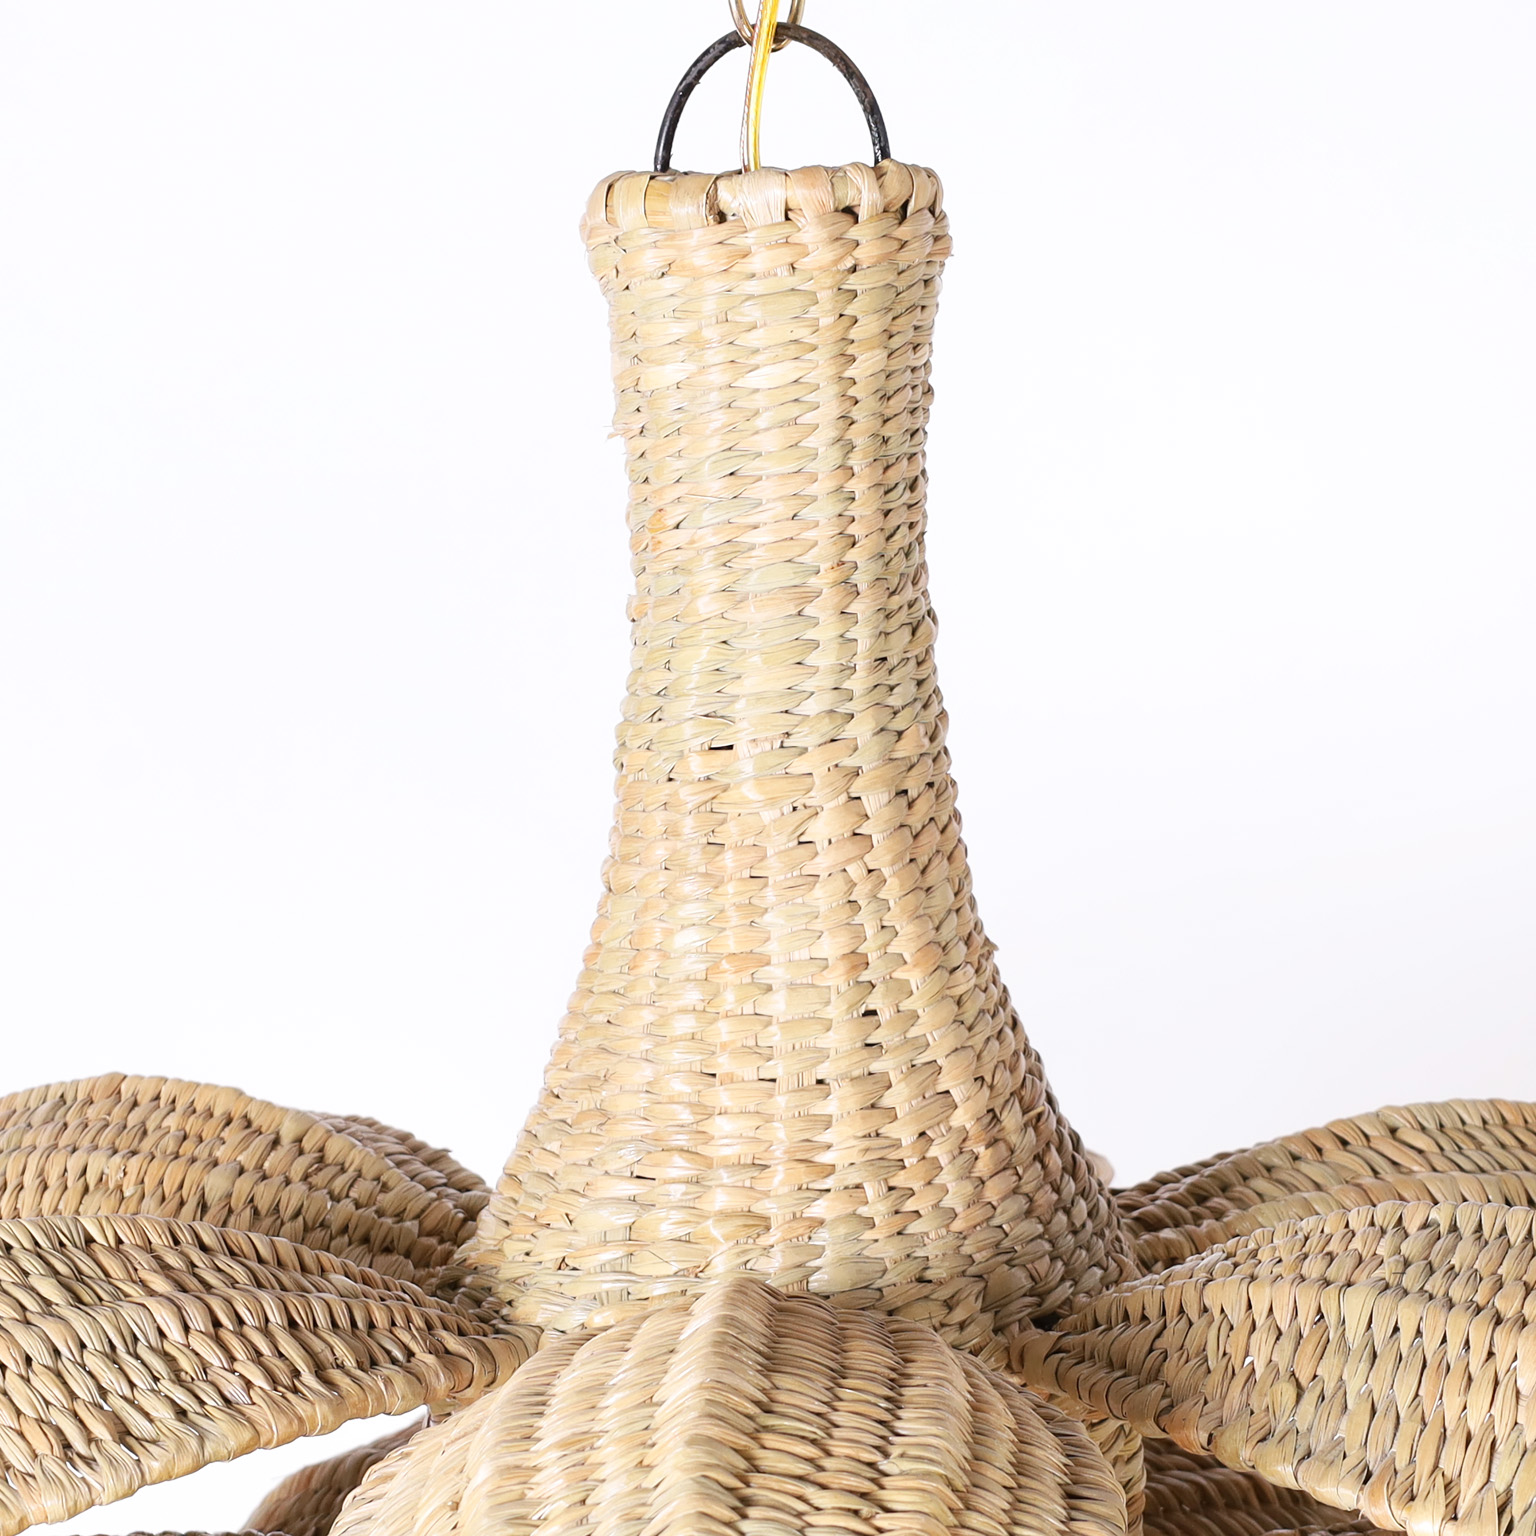 Wicker Palm Leaf or Lotus Pendant from the FS Flores Collection